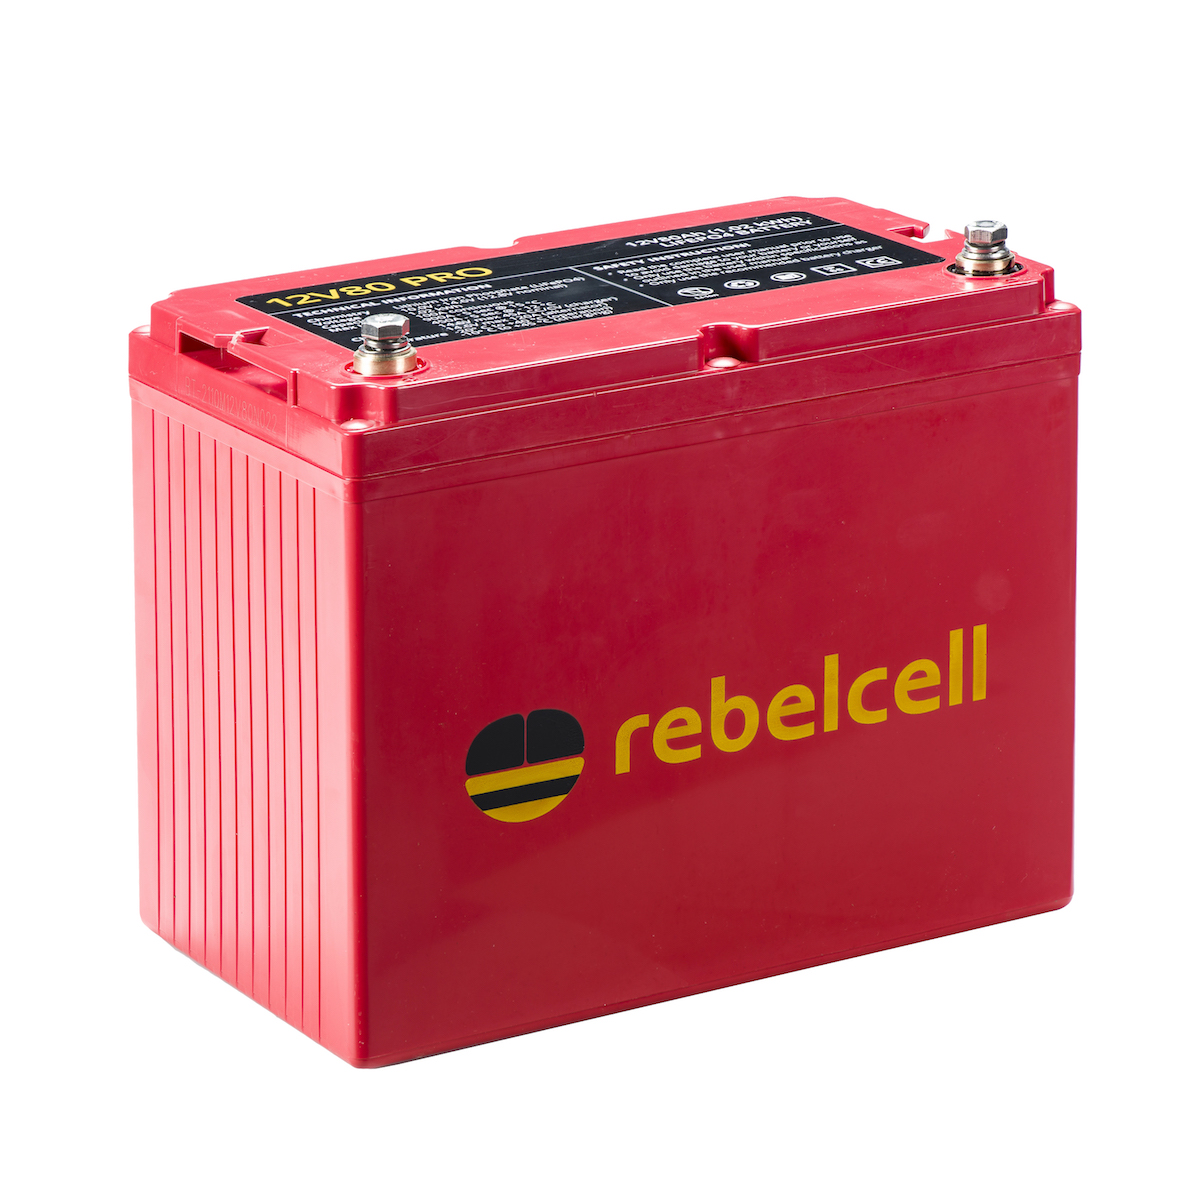 Rebelcell expands its product line with the 12V80 PRO lithium battery